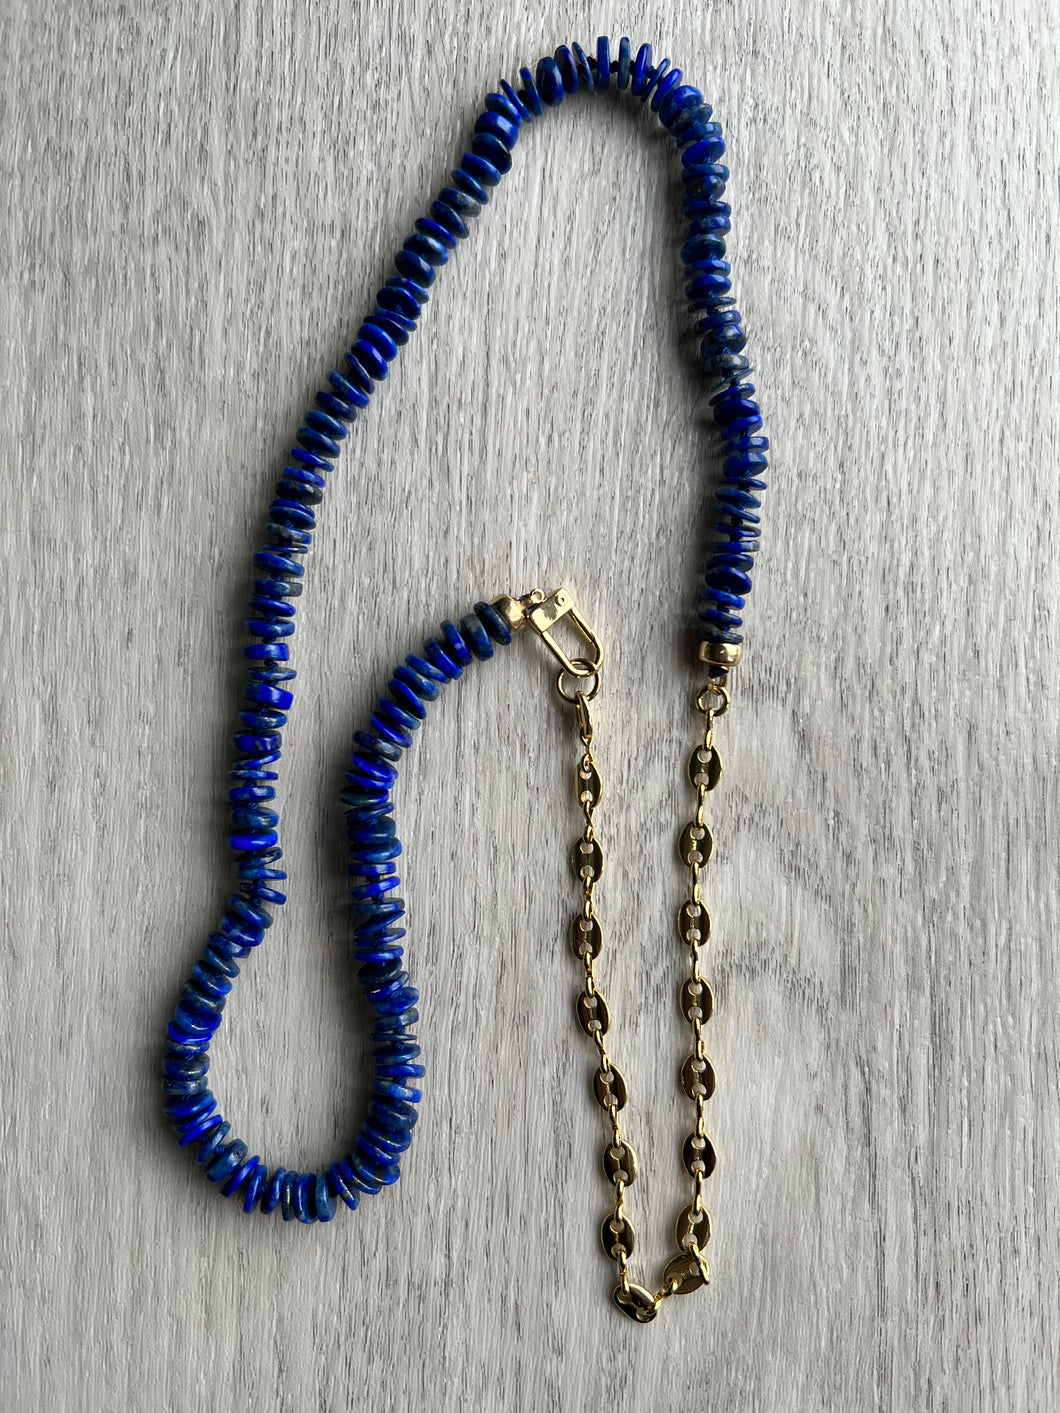 Lapis and gold necklace